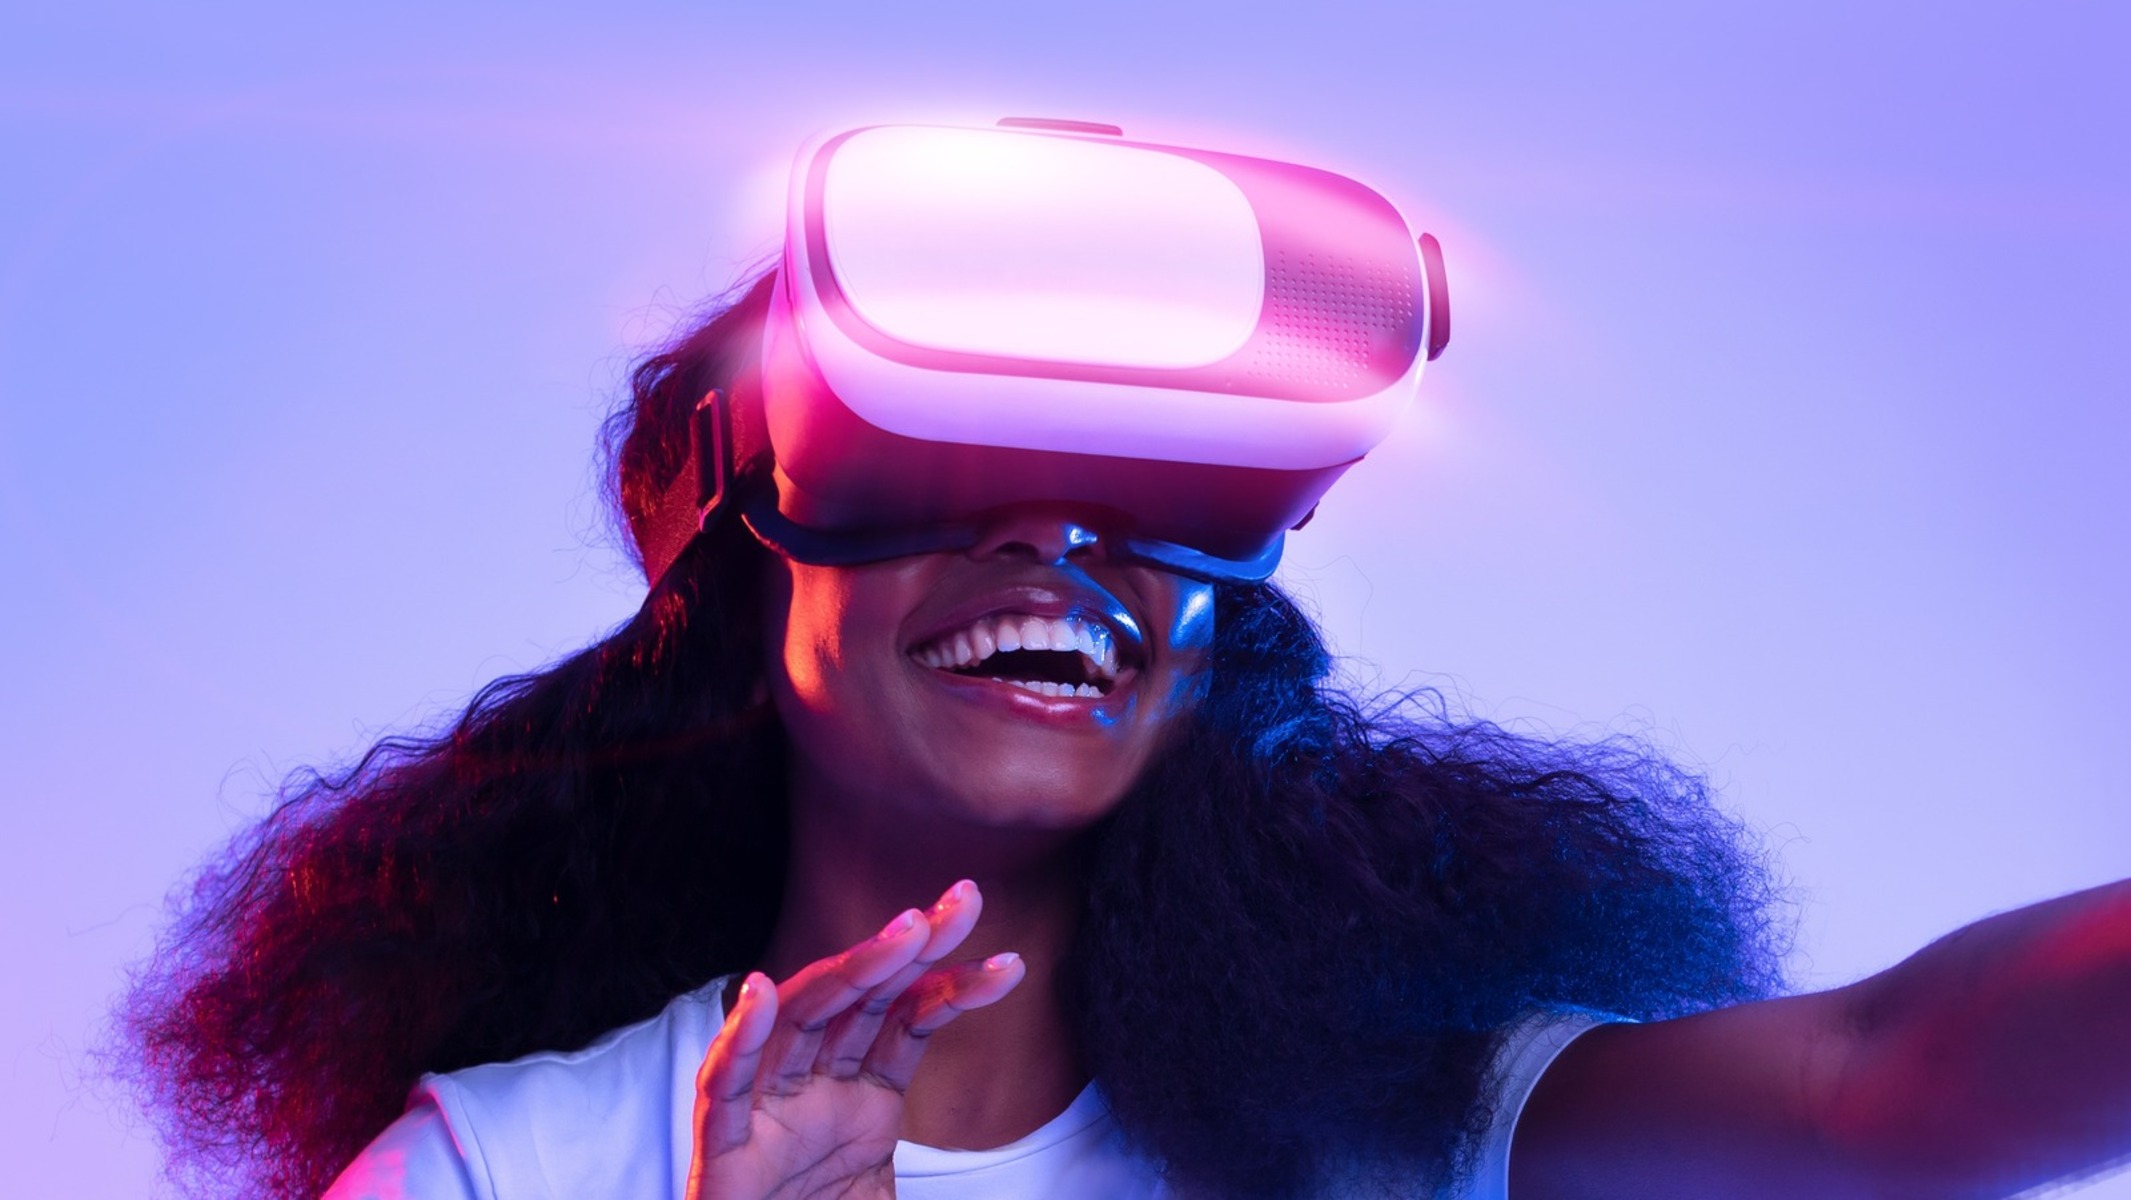 How Many People Own A VR Headset